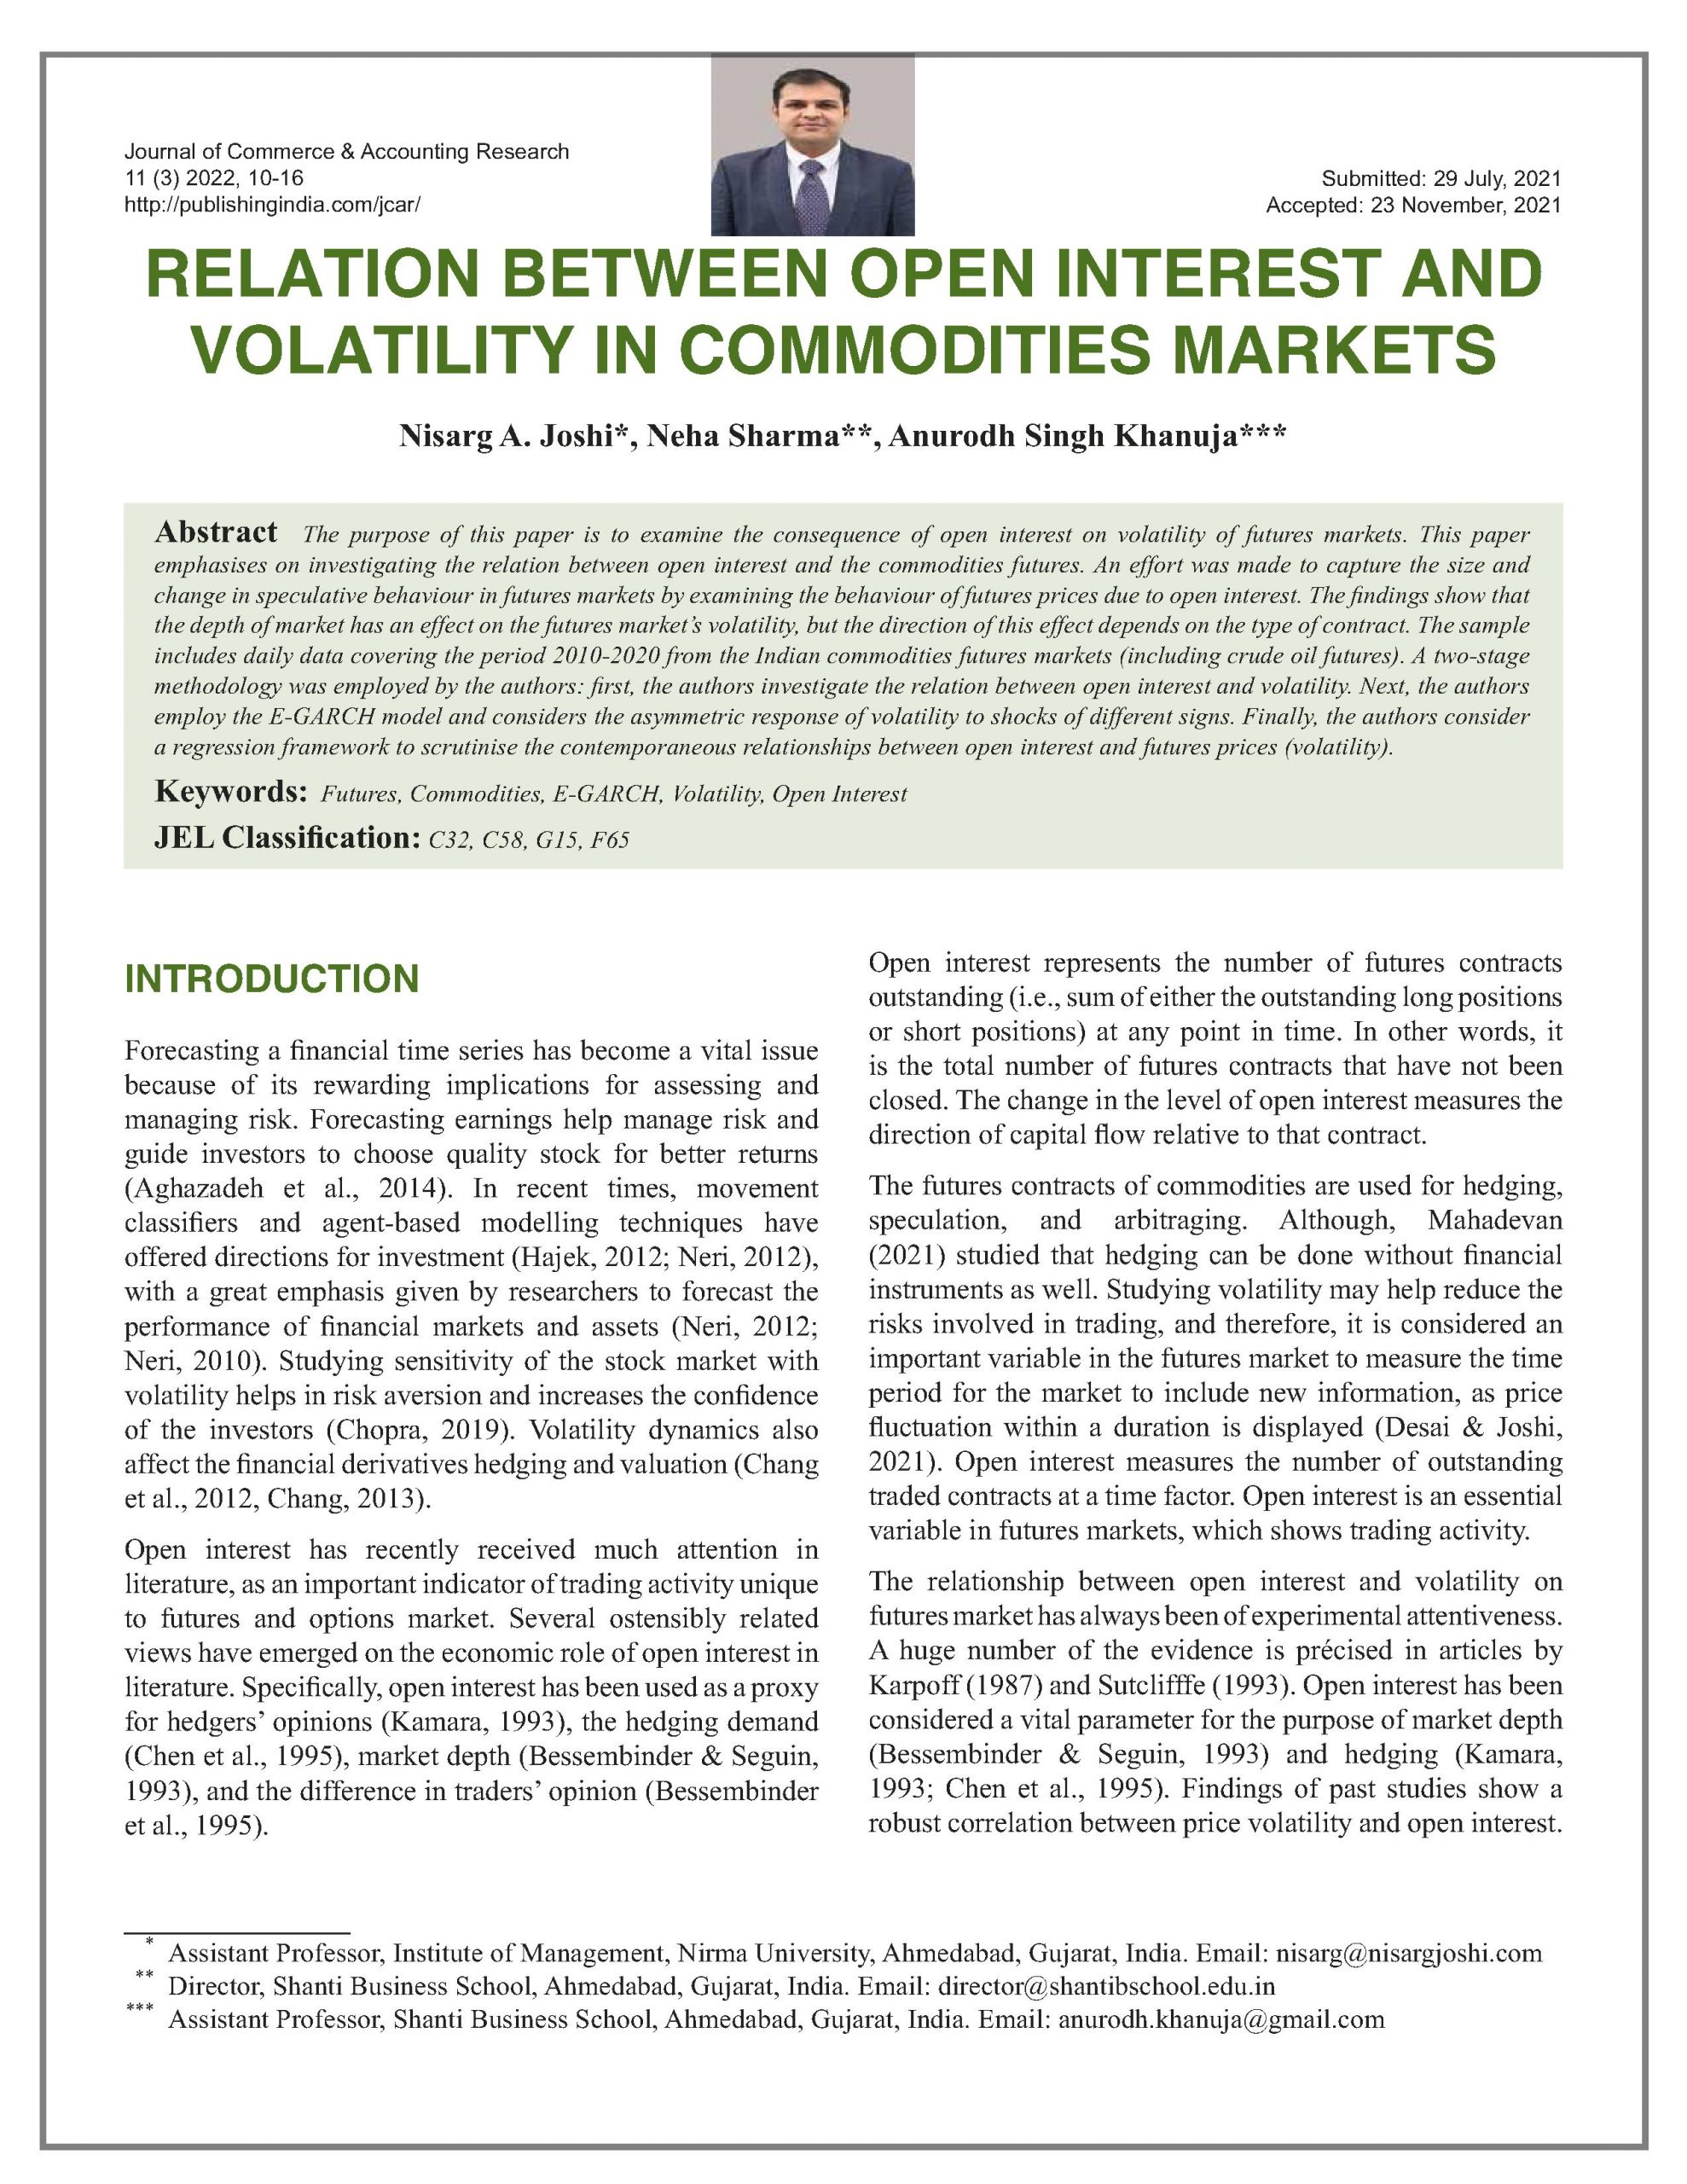 Relation Between Open Interest and Volatility in Futures Markets